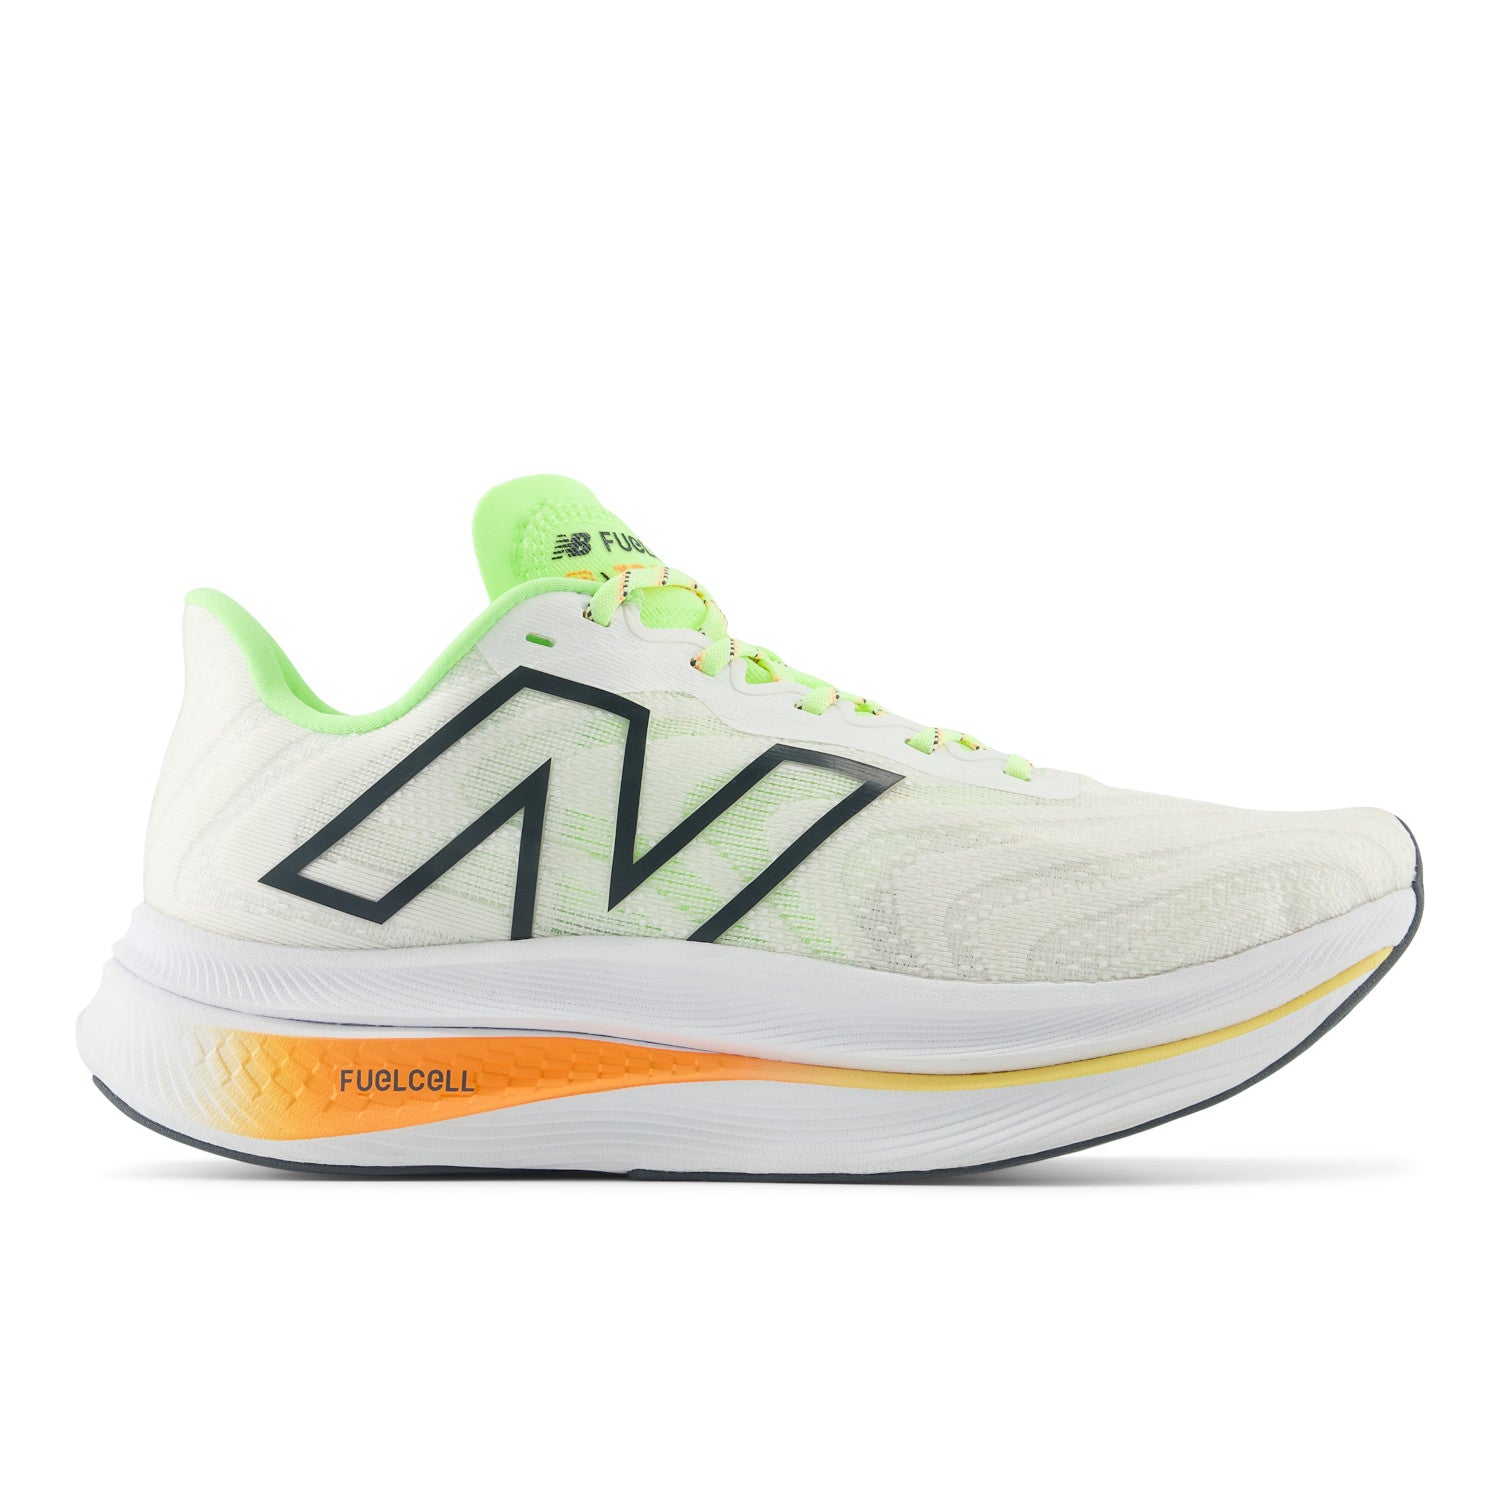 NEW BALANCE MEN'S FUELCELL SUPERCOMP TRAINER V2 - D - CA3 WHITE/BLEACHED LIME 7.0